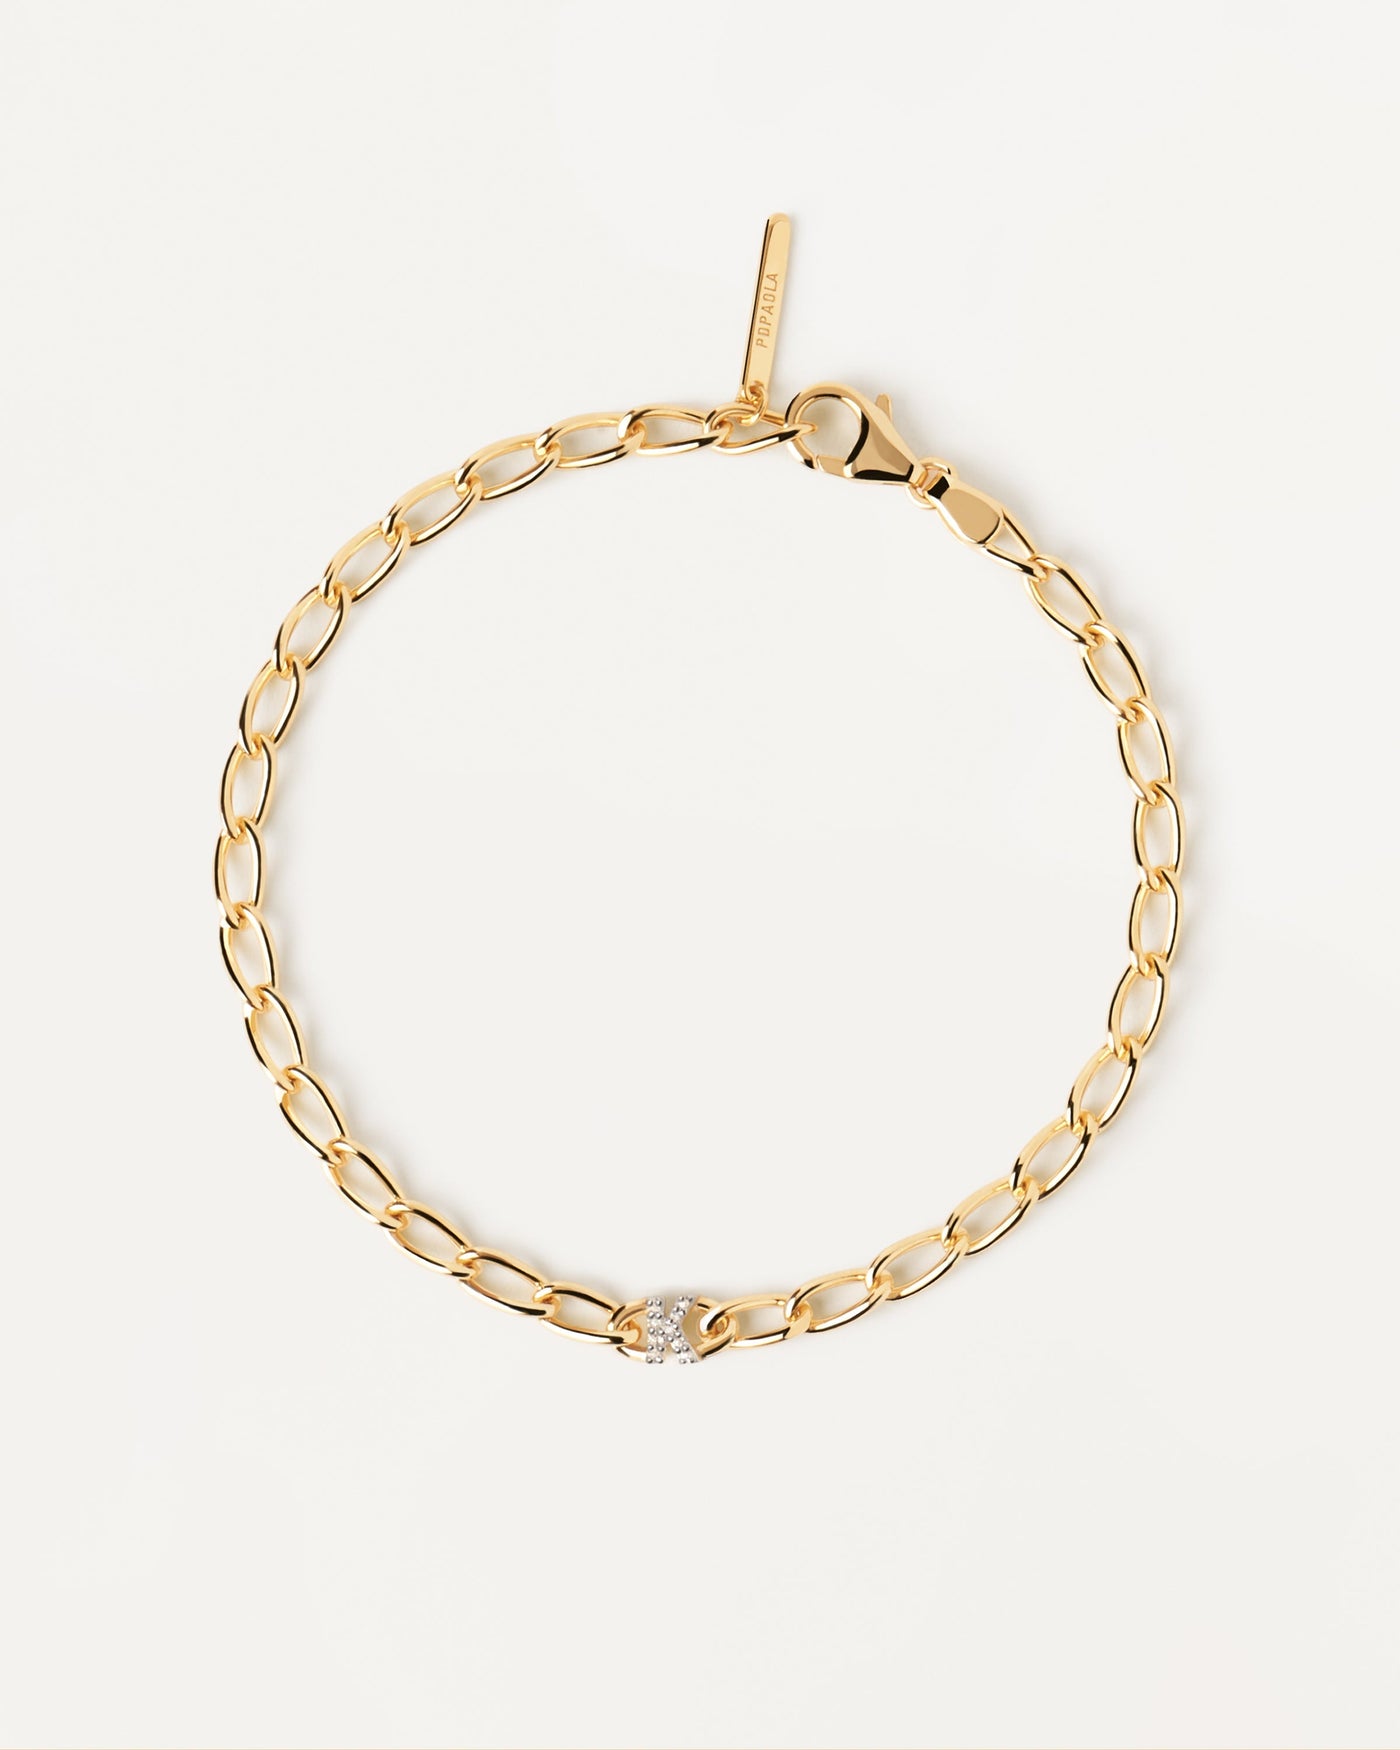 2023 Selection | Letter K Chain Bracelet. cable chain bracelet in gold-plated silver with initial K in zirconia. Get the latest arrival from PDPAOLA. Place your order safely and get this Best Seller. Free Shipping.